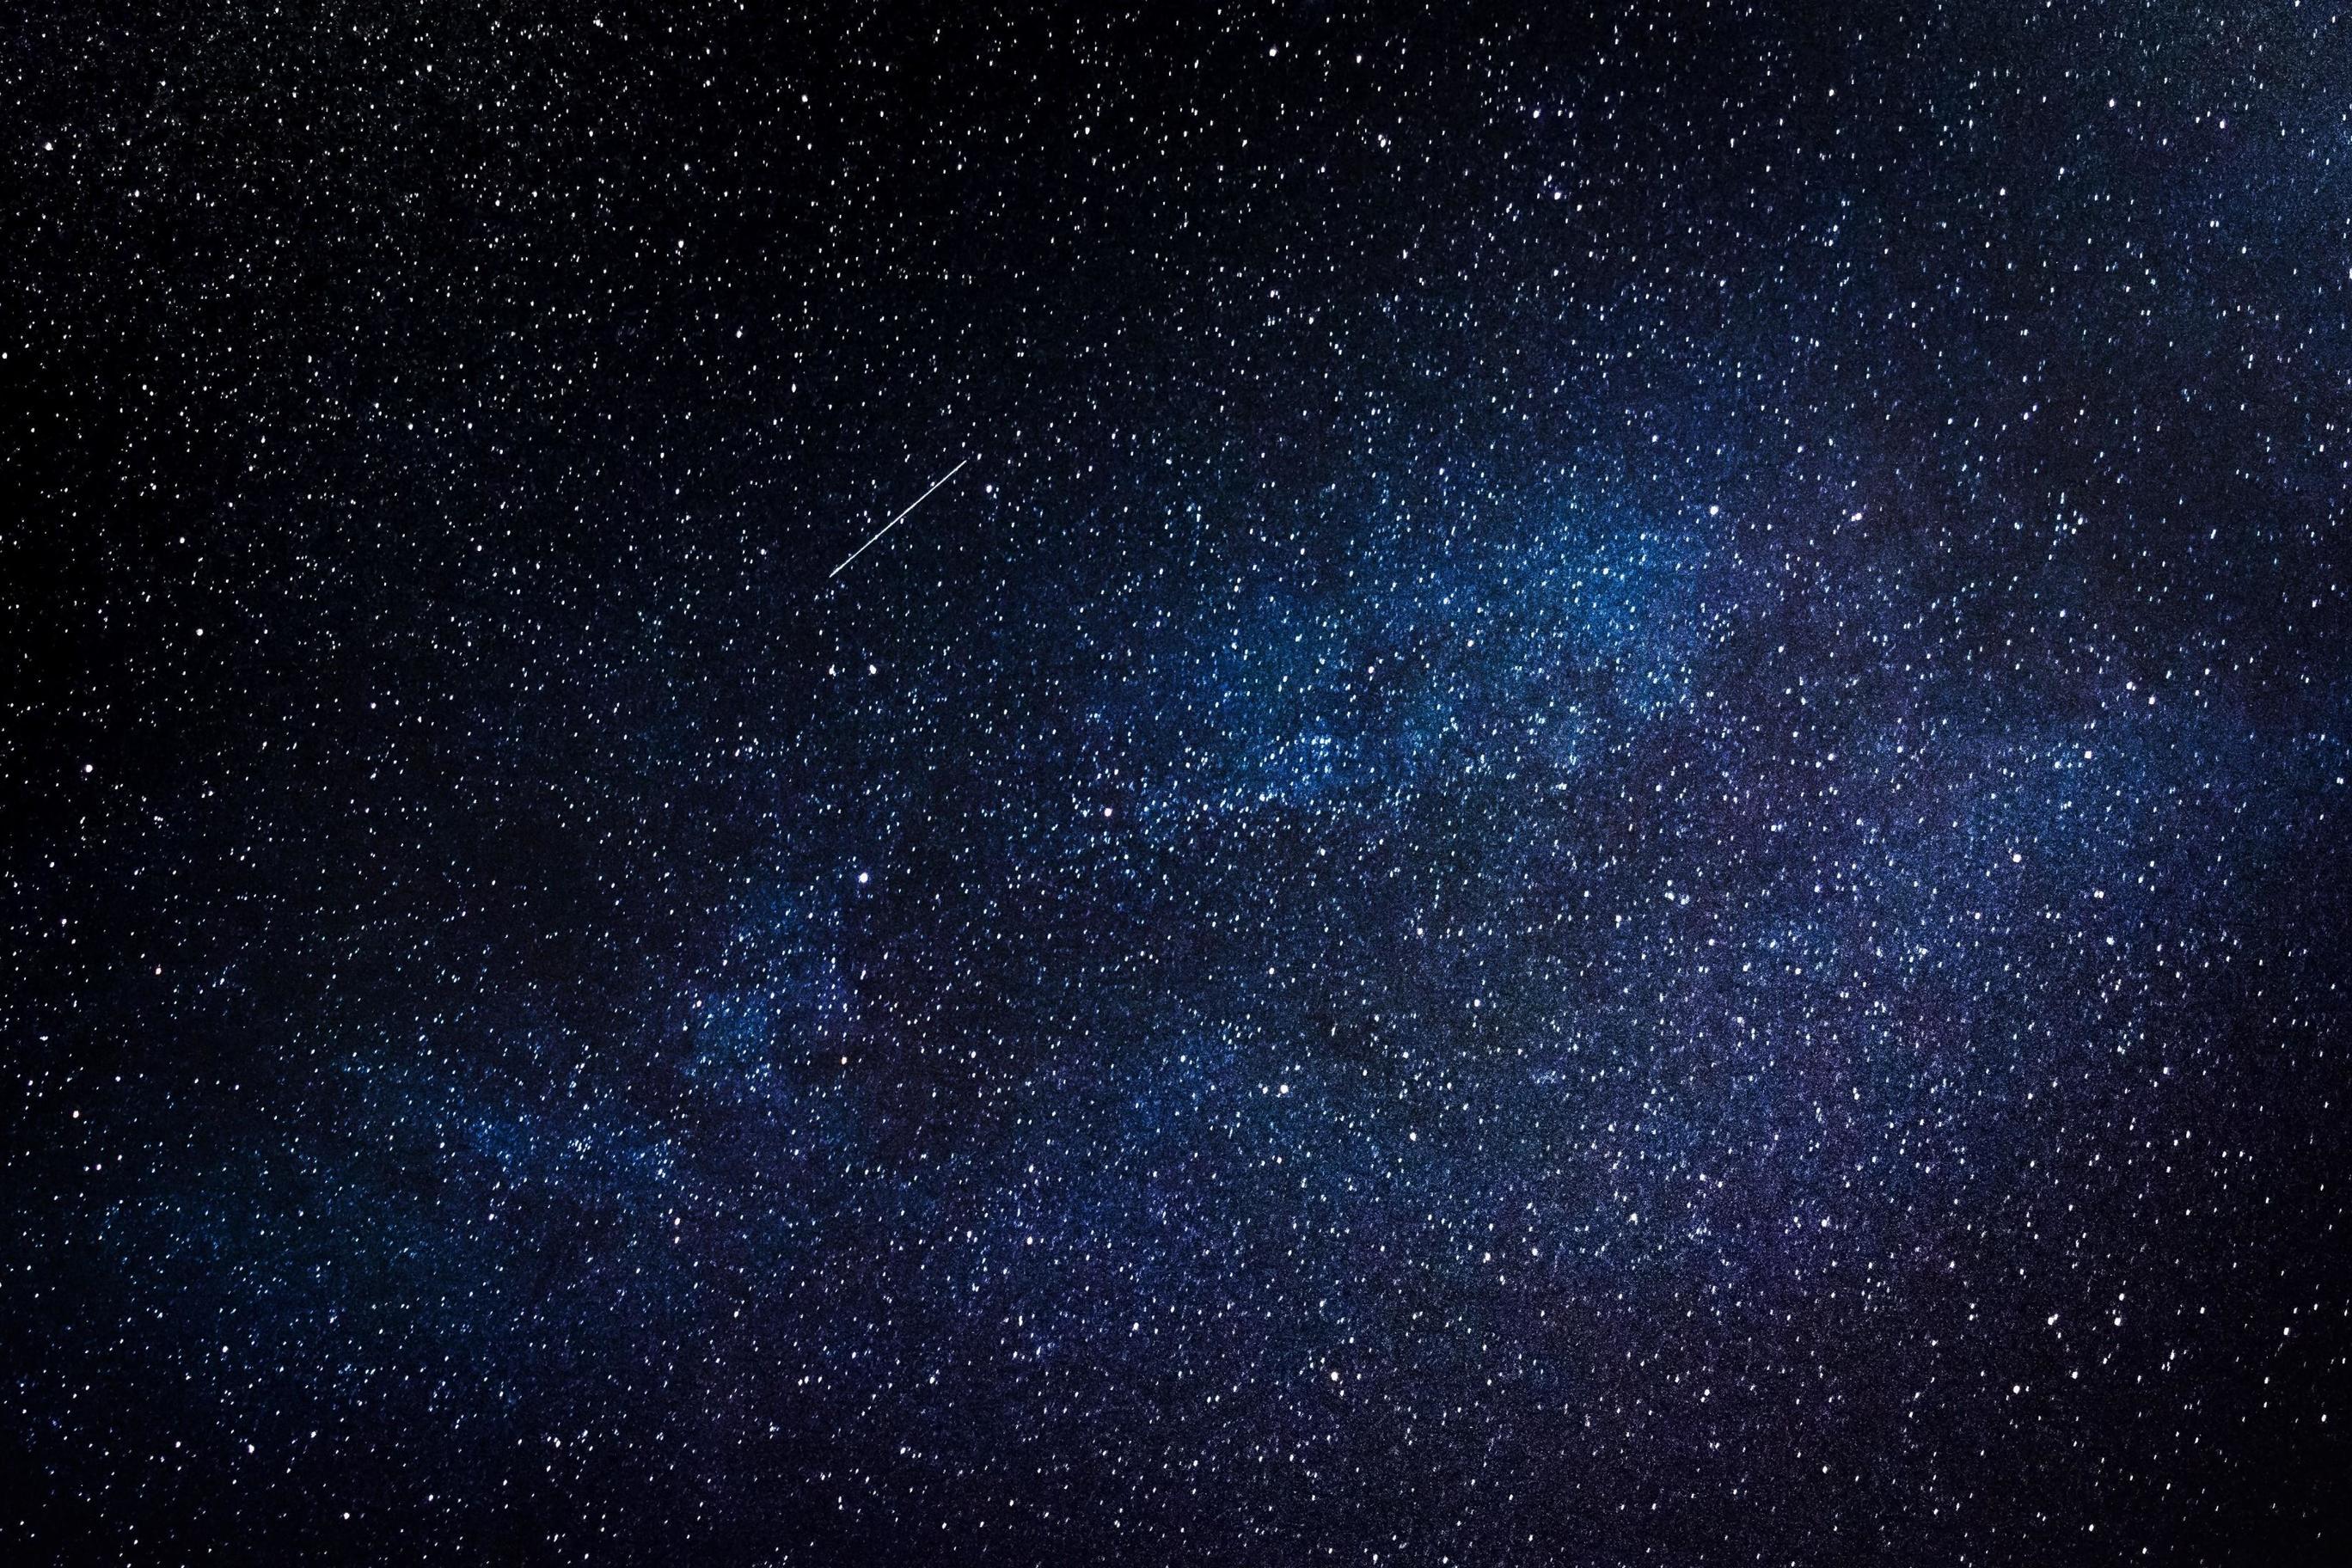 Milky Way 2736x14 Hd Wallpapers Top Free Milky Way 2736x14 Hd Backgrounds Wallpaperaccess